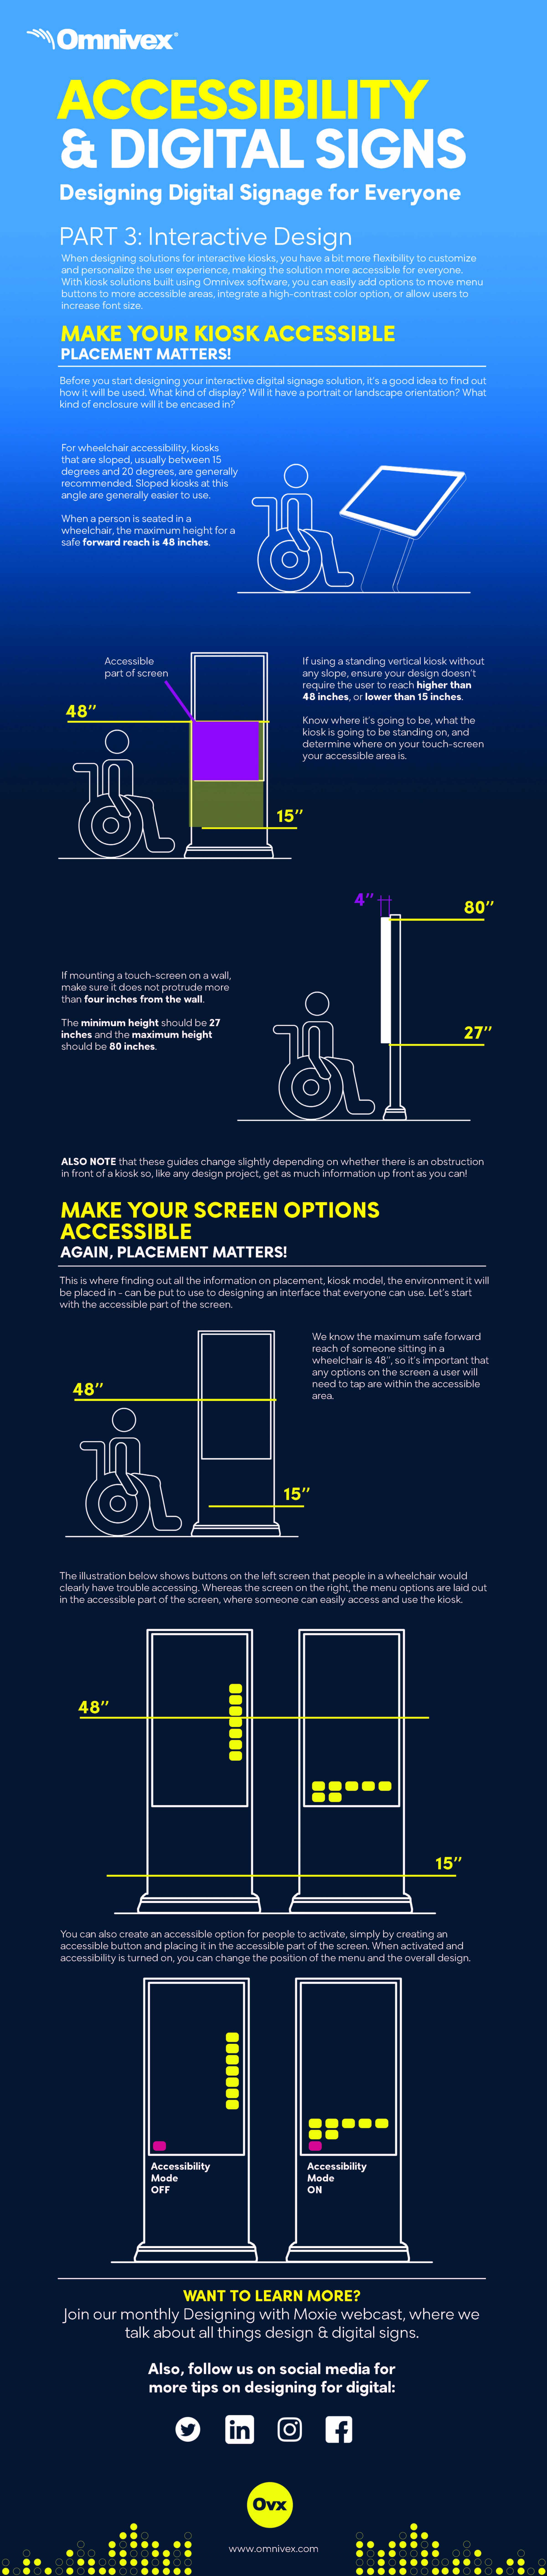 Accessibility - Interactive Design infographic